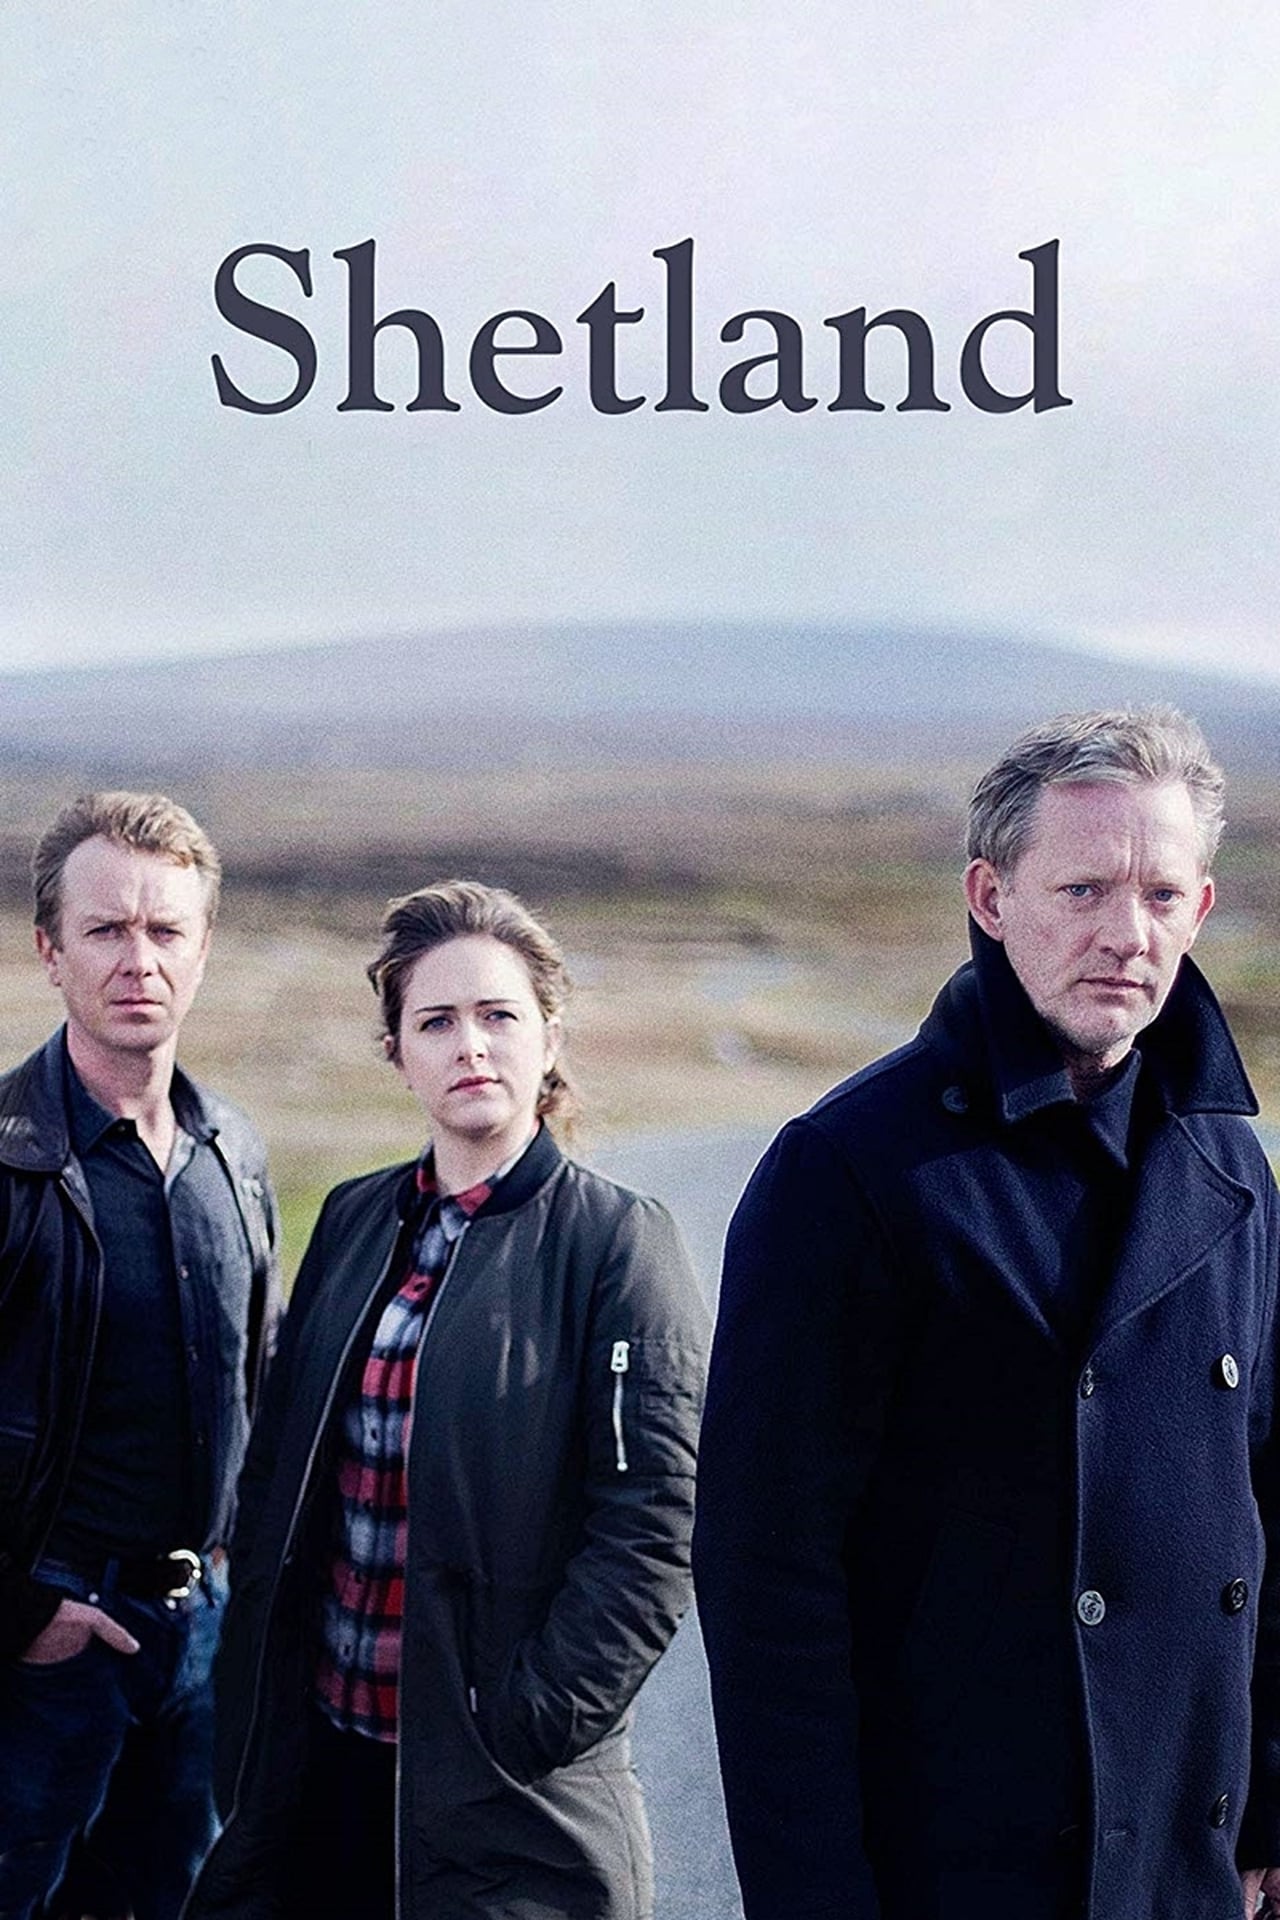 Shetland, Season 5 release date, trailers, cast, synopsis and reviews